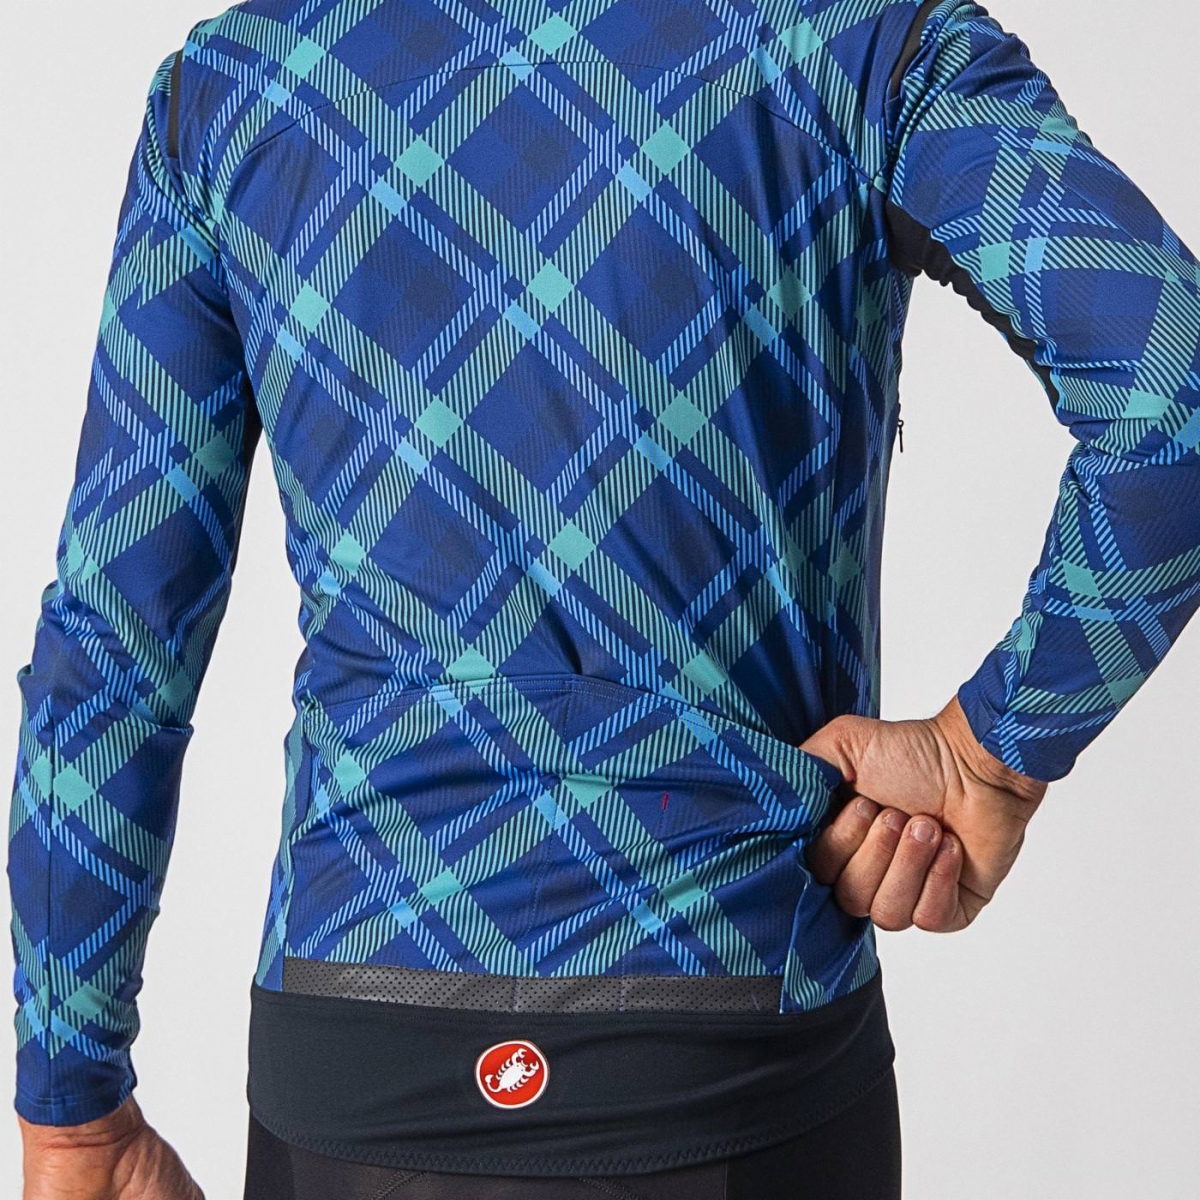 PERFETTO ROS LONG SLEEVE